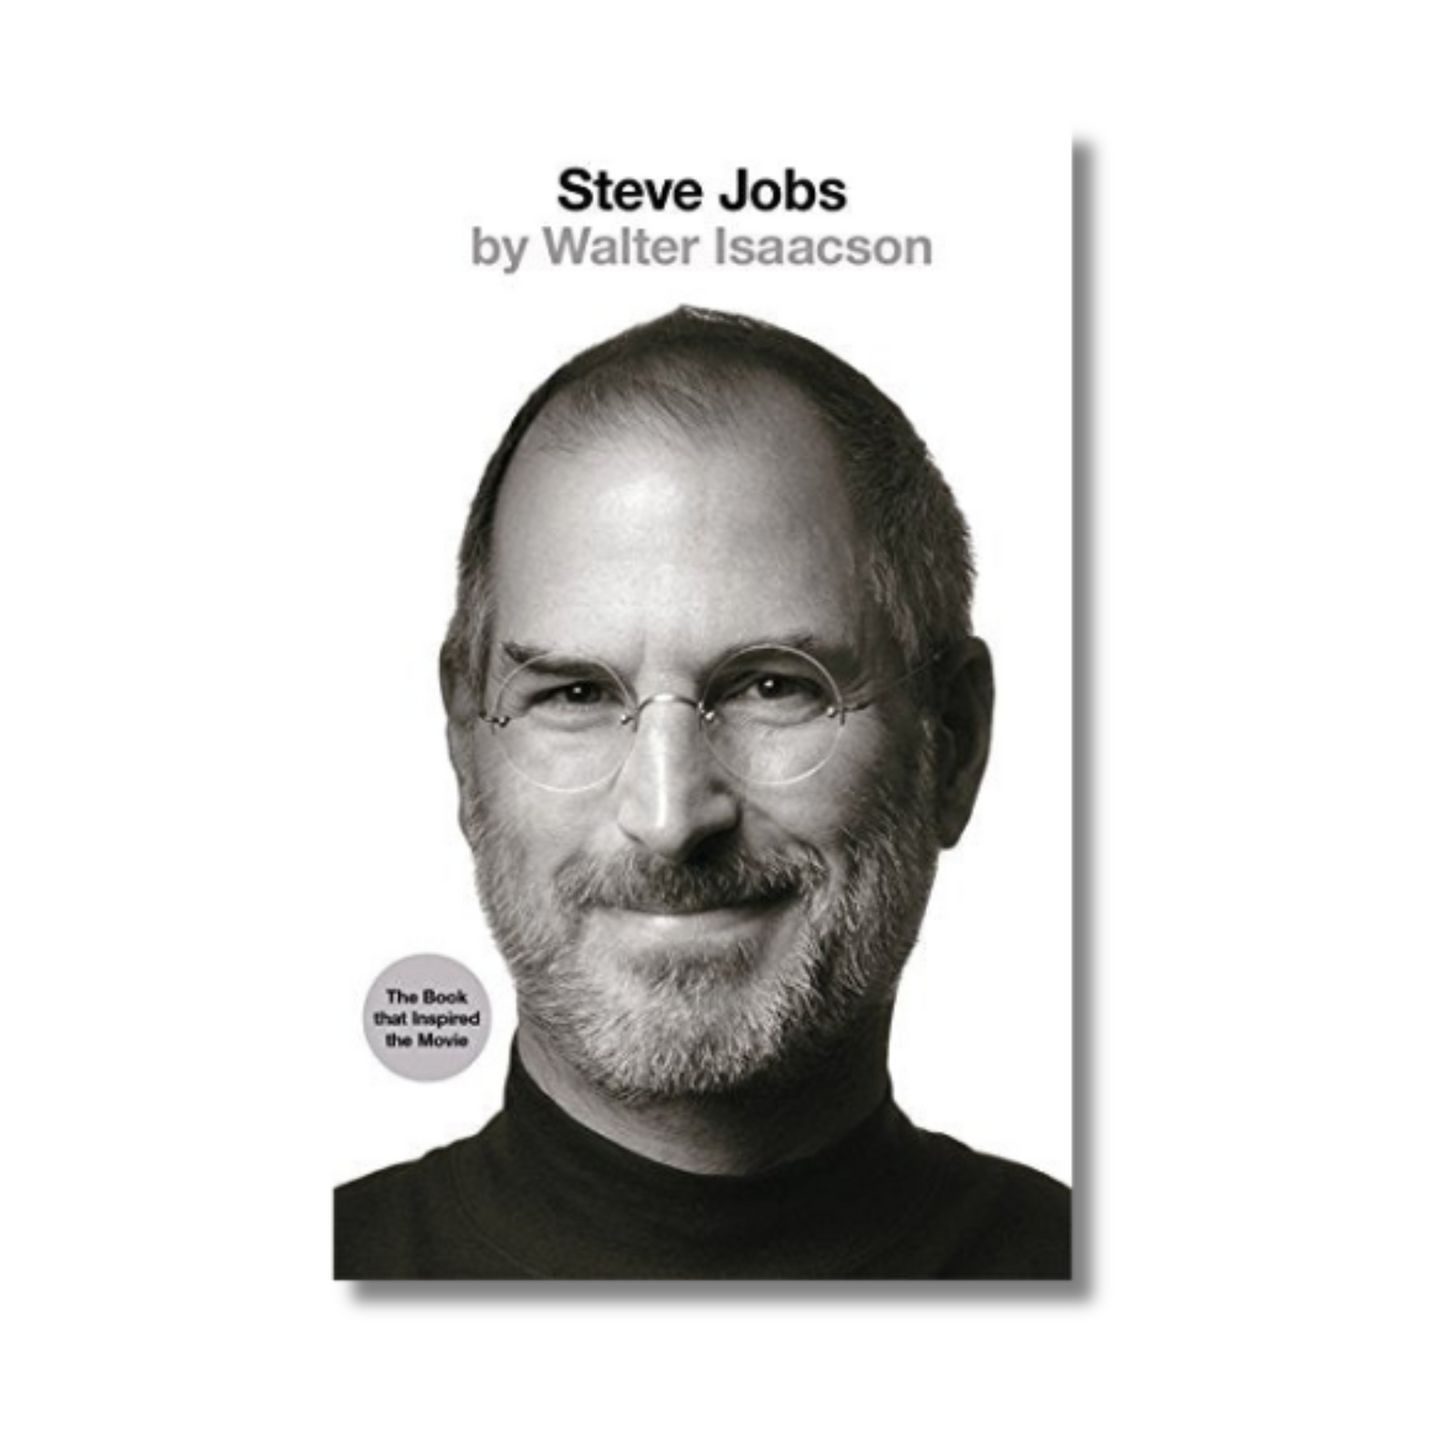 Steve Jobs by Walter Isaacson (Paperback)